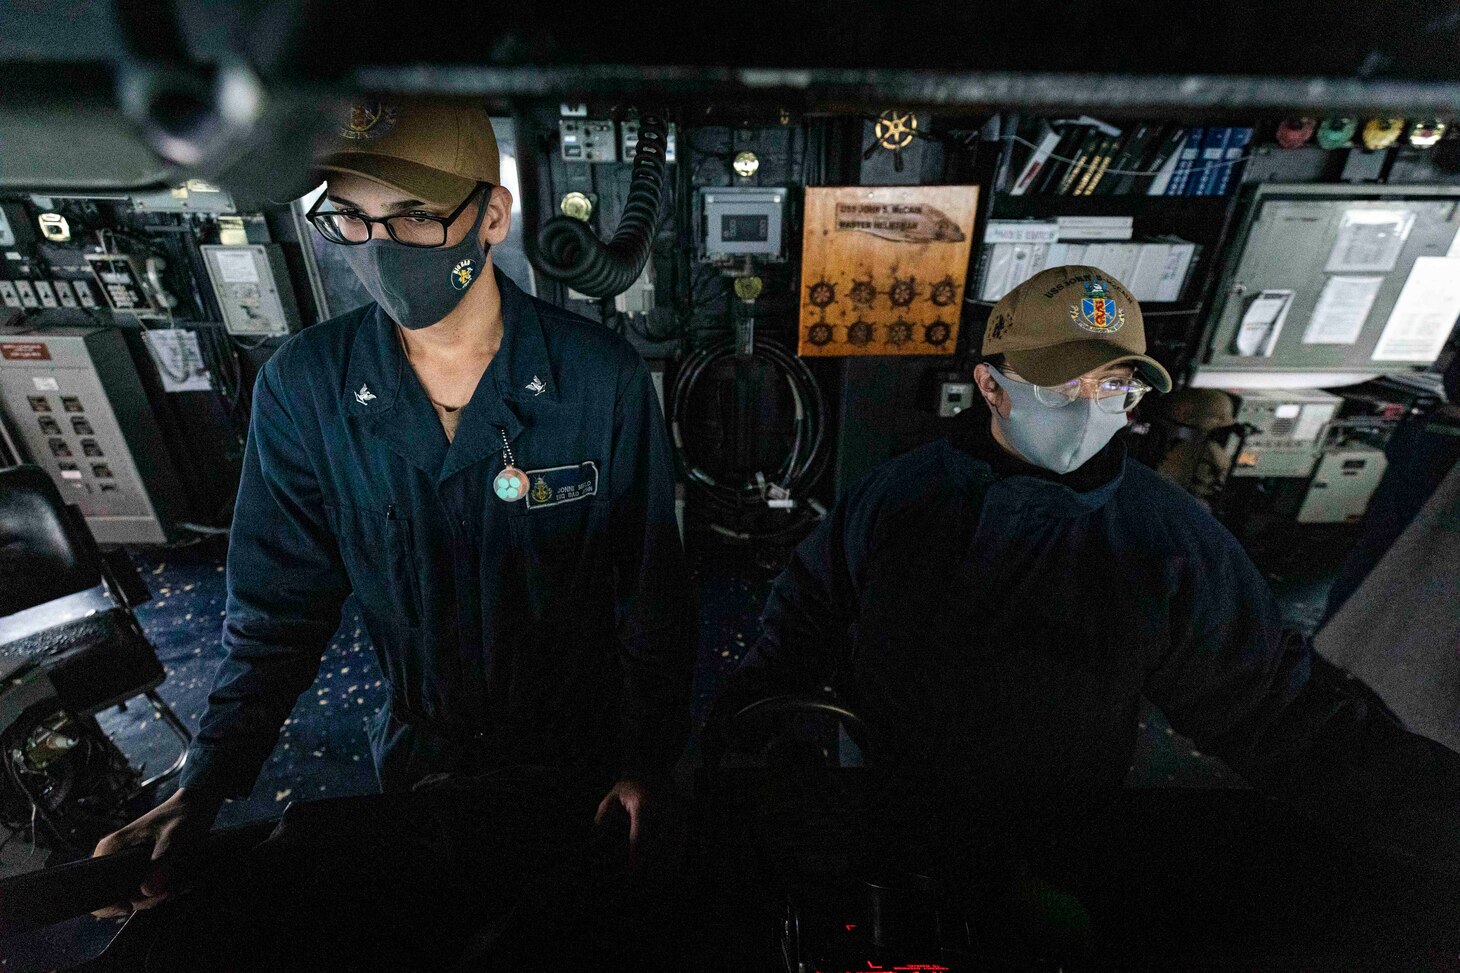 TAIWAN STRAIT (Dec. 30, 2020) Boatswain’s Mate 3rd Class Jonni Melo, left, from Bronx, New York, and Boatswain’s Mate 3rd Class Nicole Zapata, from Tampa, Florida, stand watch in the pilot house aboard guided-missile destroyer USS John S. McCain (DDG 56) while the ship conducts routine underway operations in support of stability and security for a free and open Indo-Pacific.